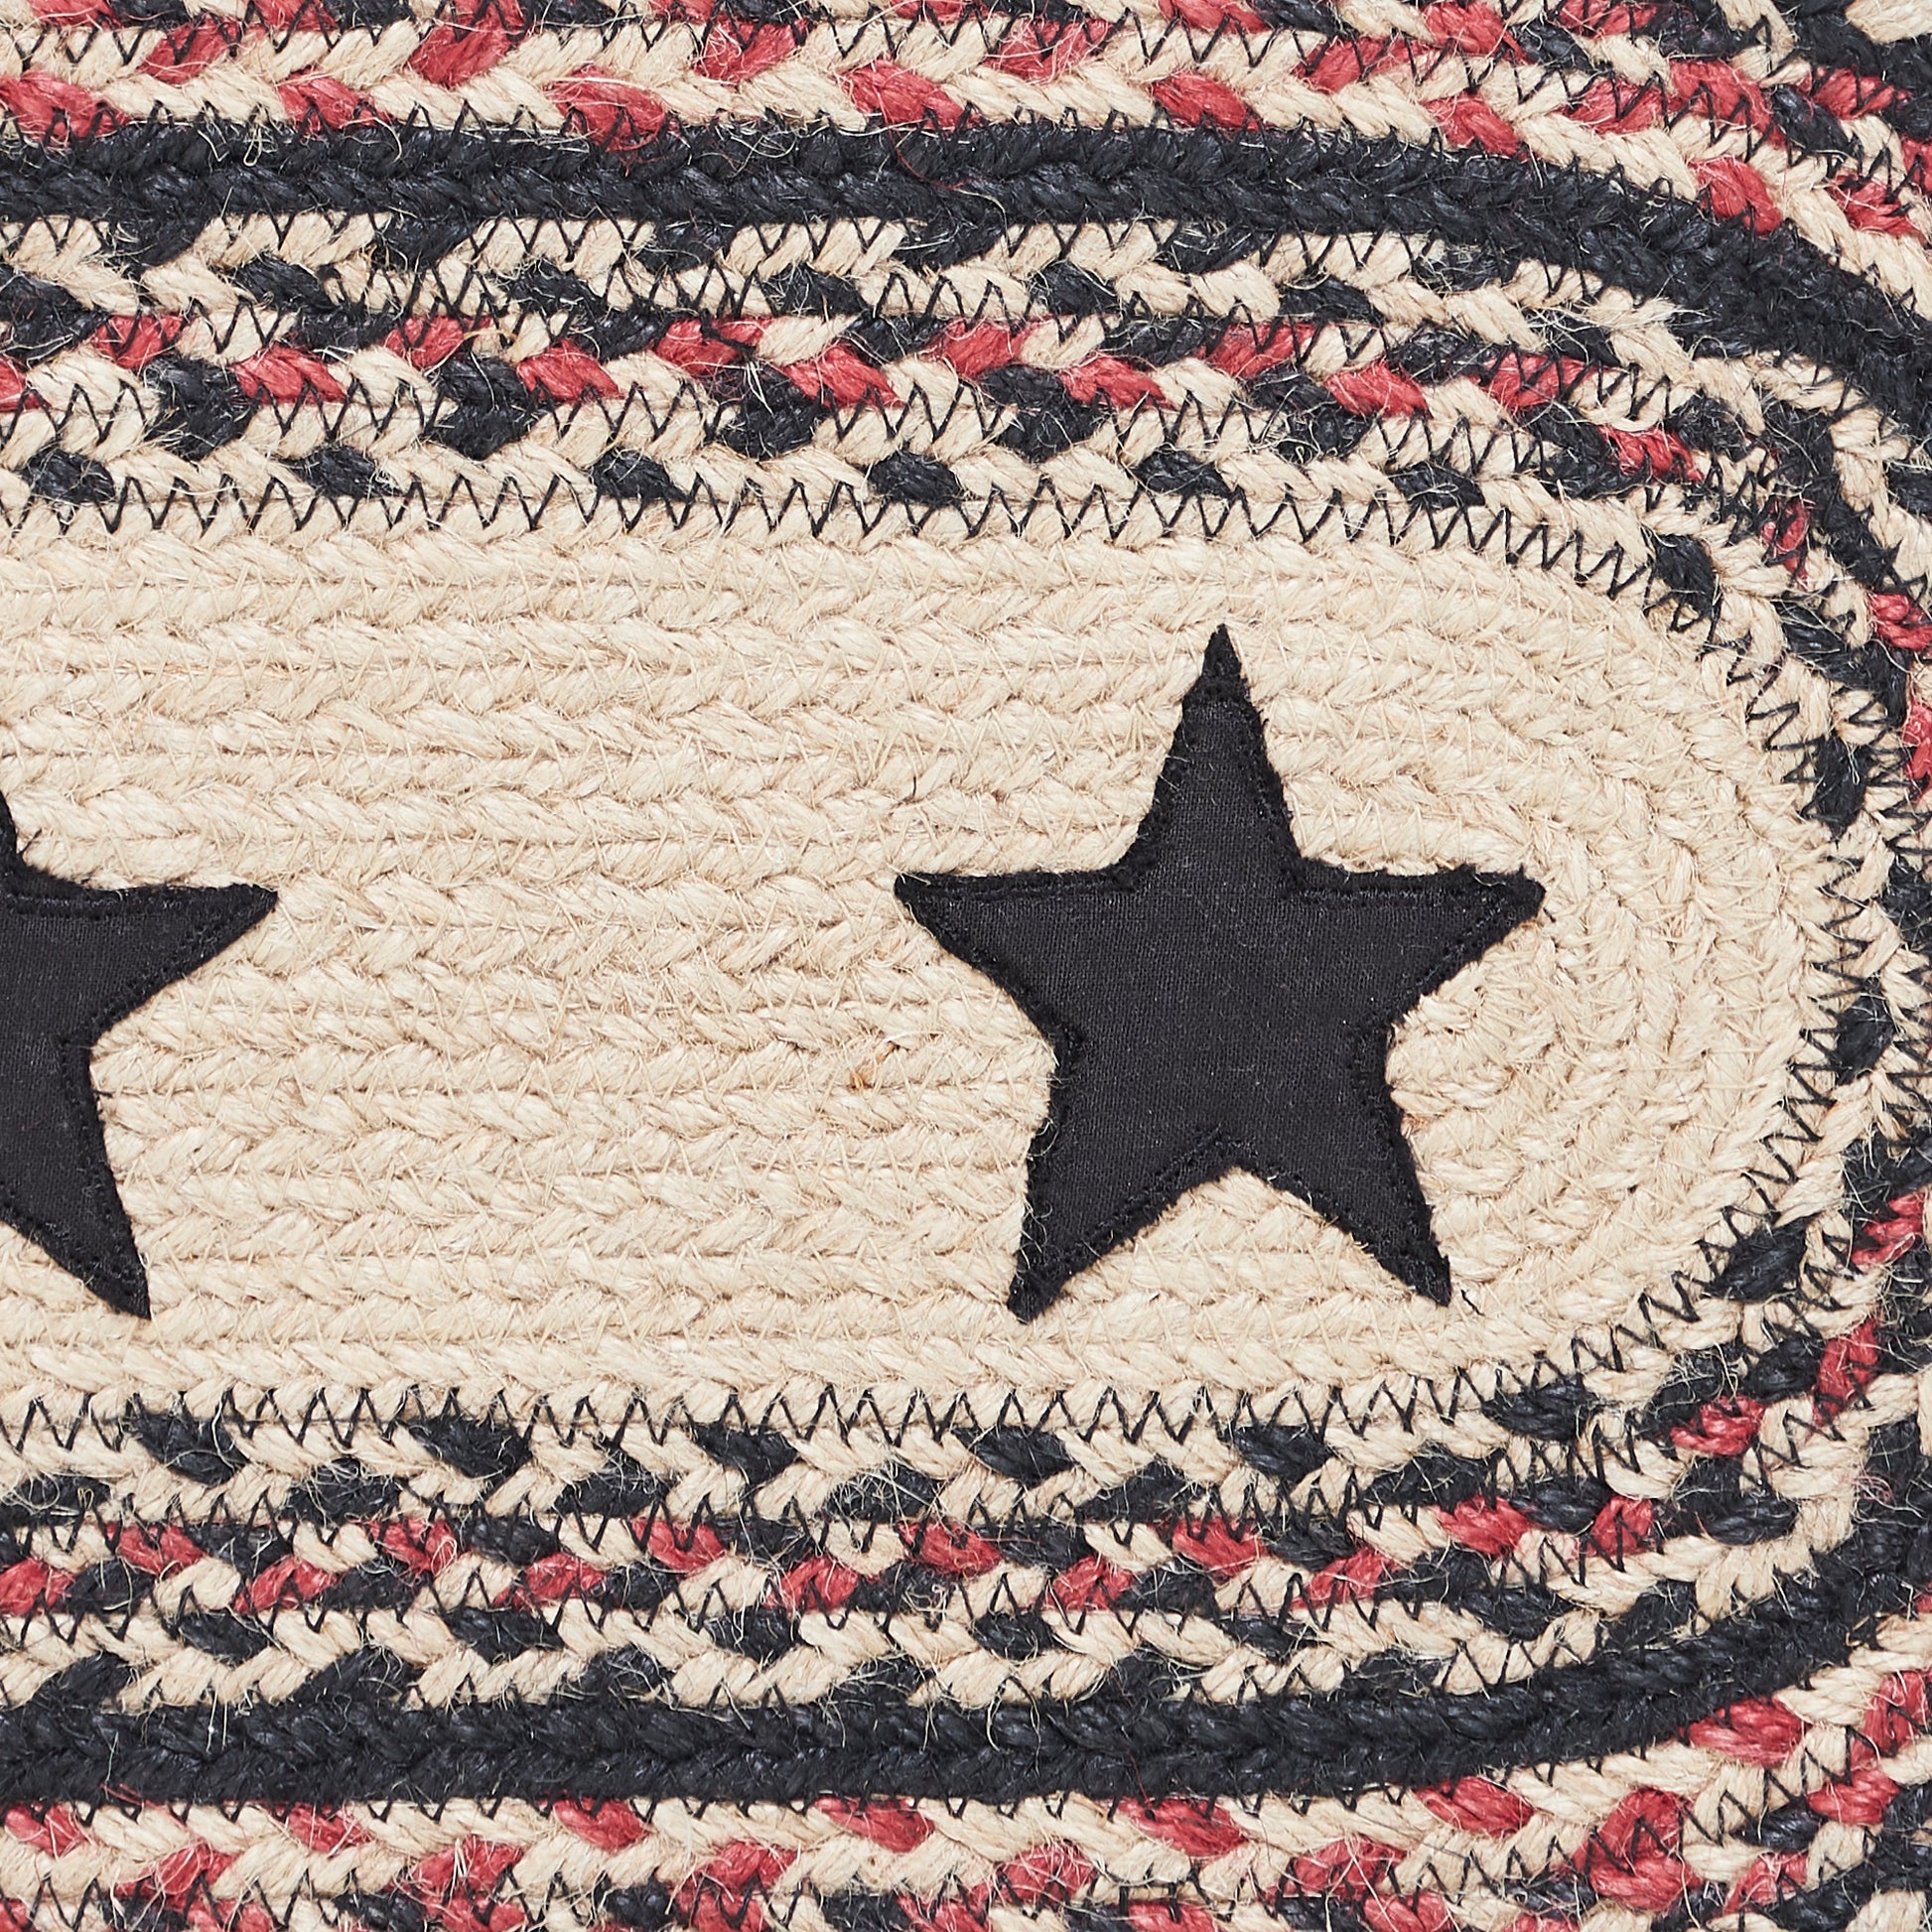 81330-Colonial-Star-Jute-Oval-Runner-13x48-image-3